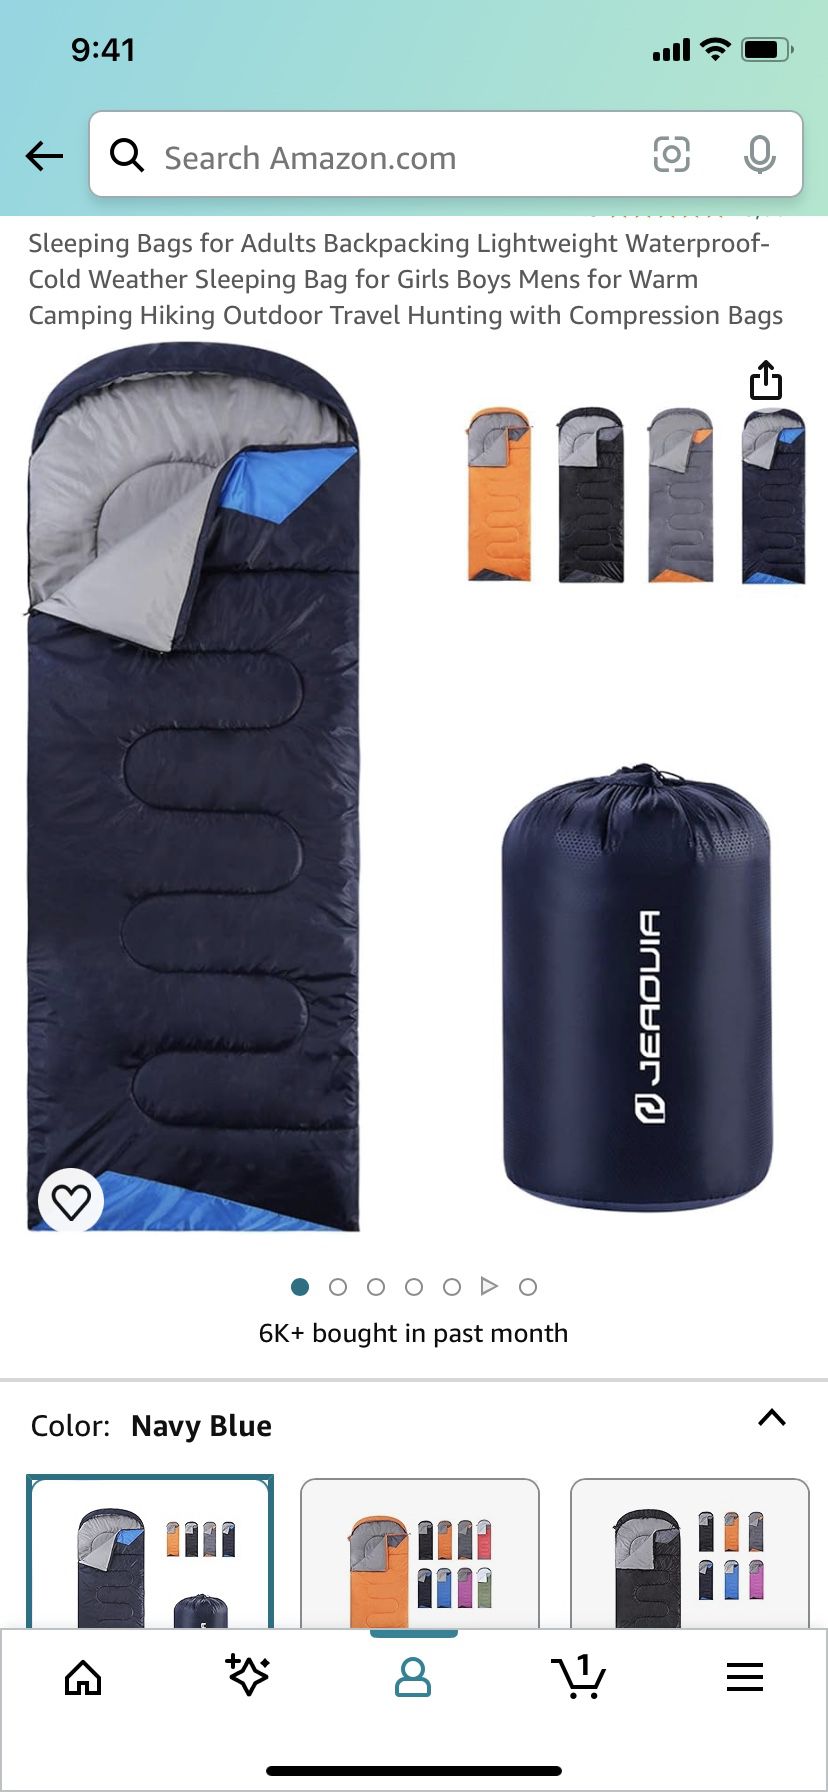 NEW Sleeping Bag for Adults Backpacking Lightweight Waterproof- Cold Weather Sleeping Bag for Girls Boys Mens for Warm Camping Hiking Outdoor Travel 